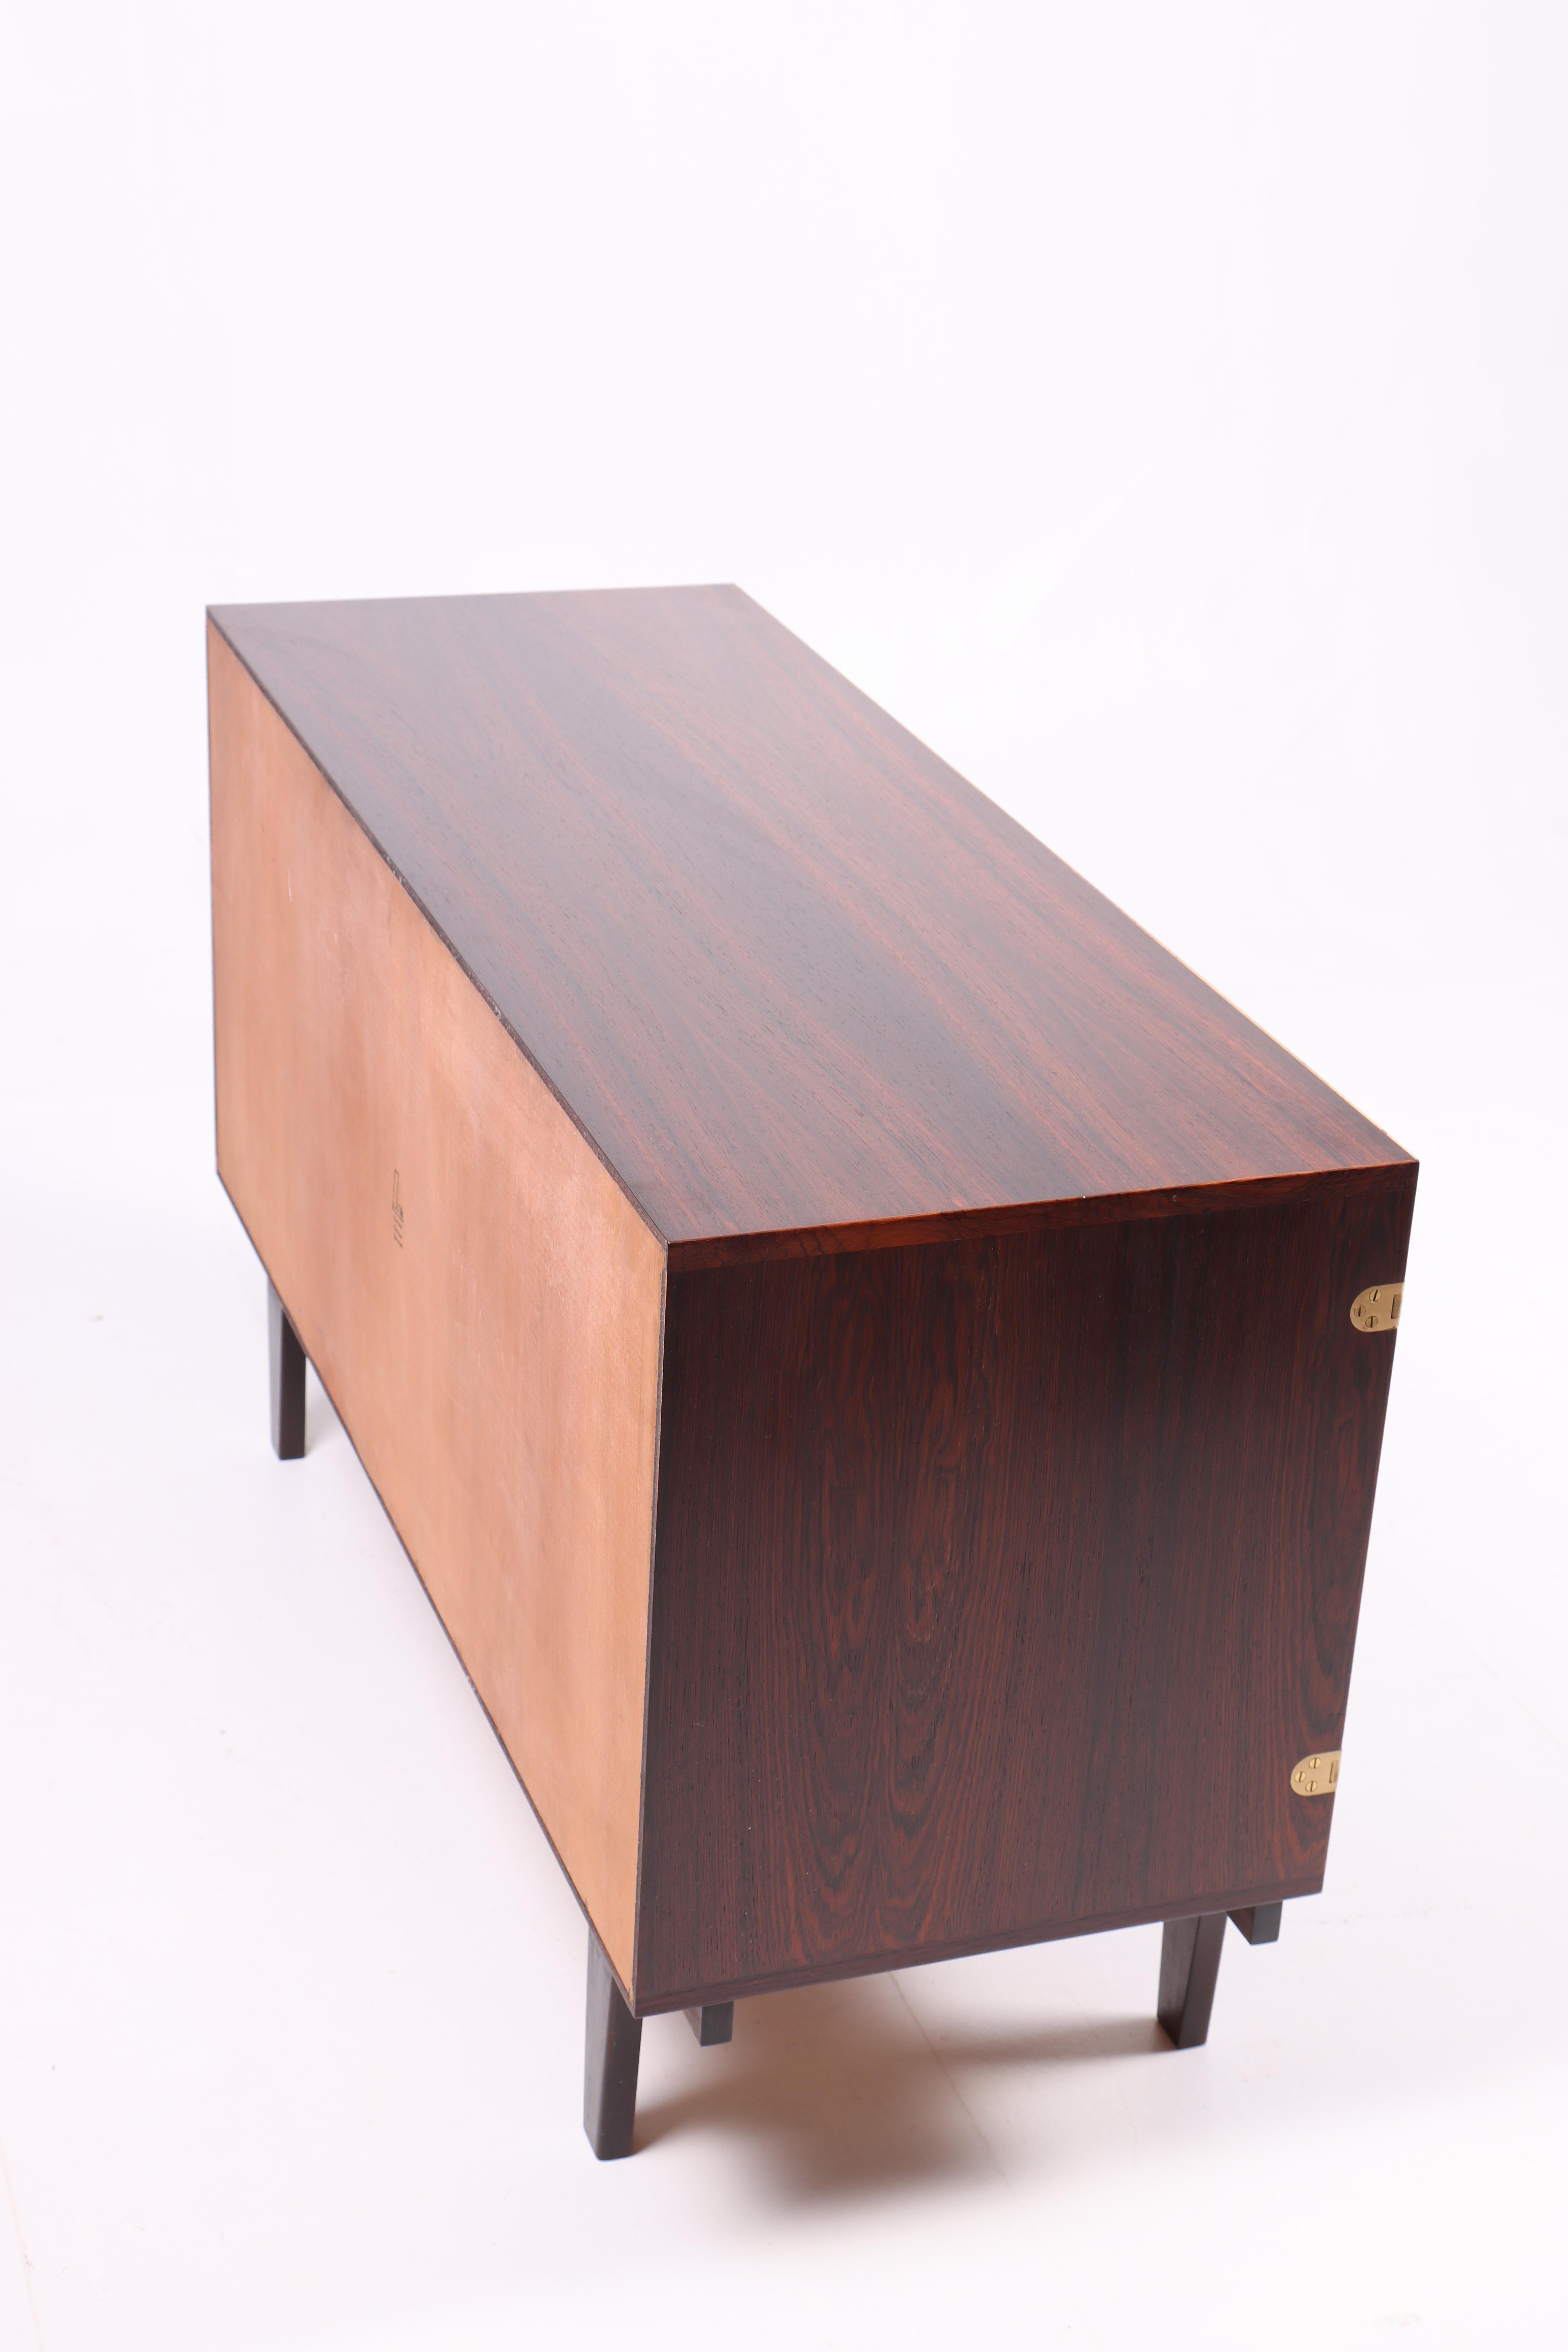 Midcentury Low Cabinet in Rosewood with Brass Hardware by Løgvig, Denmark, 1960s For Sale 4